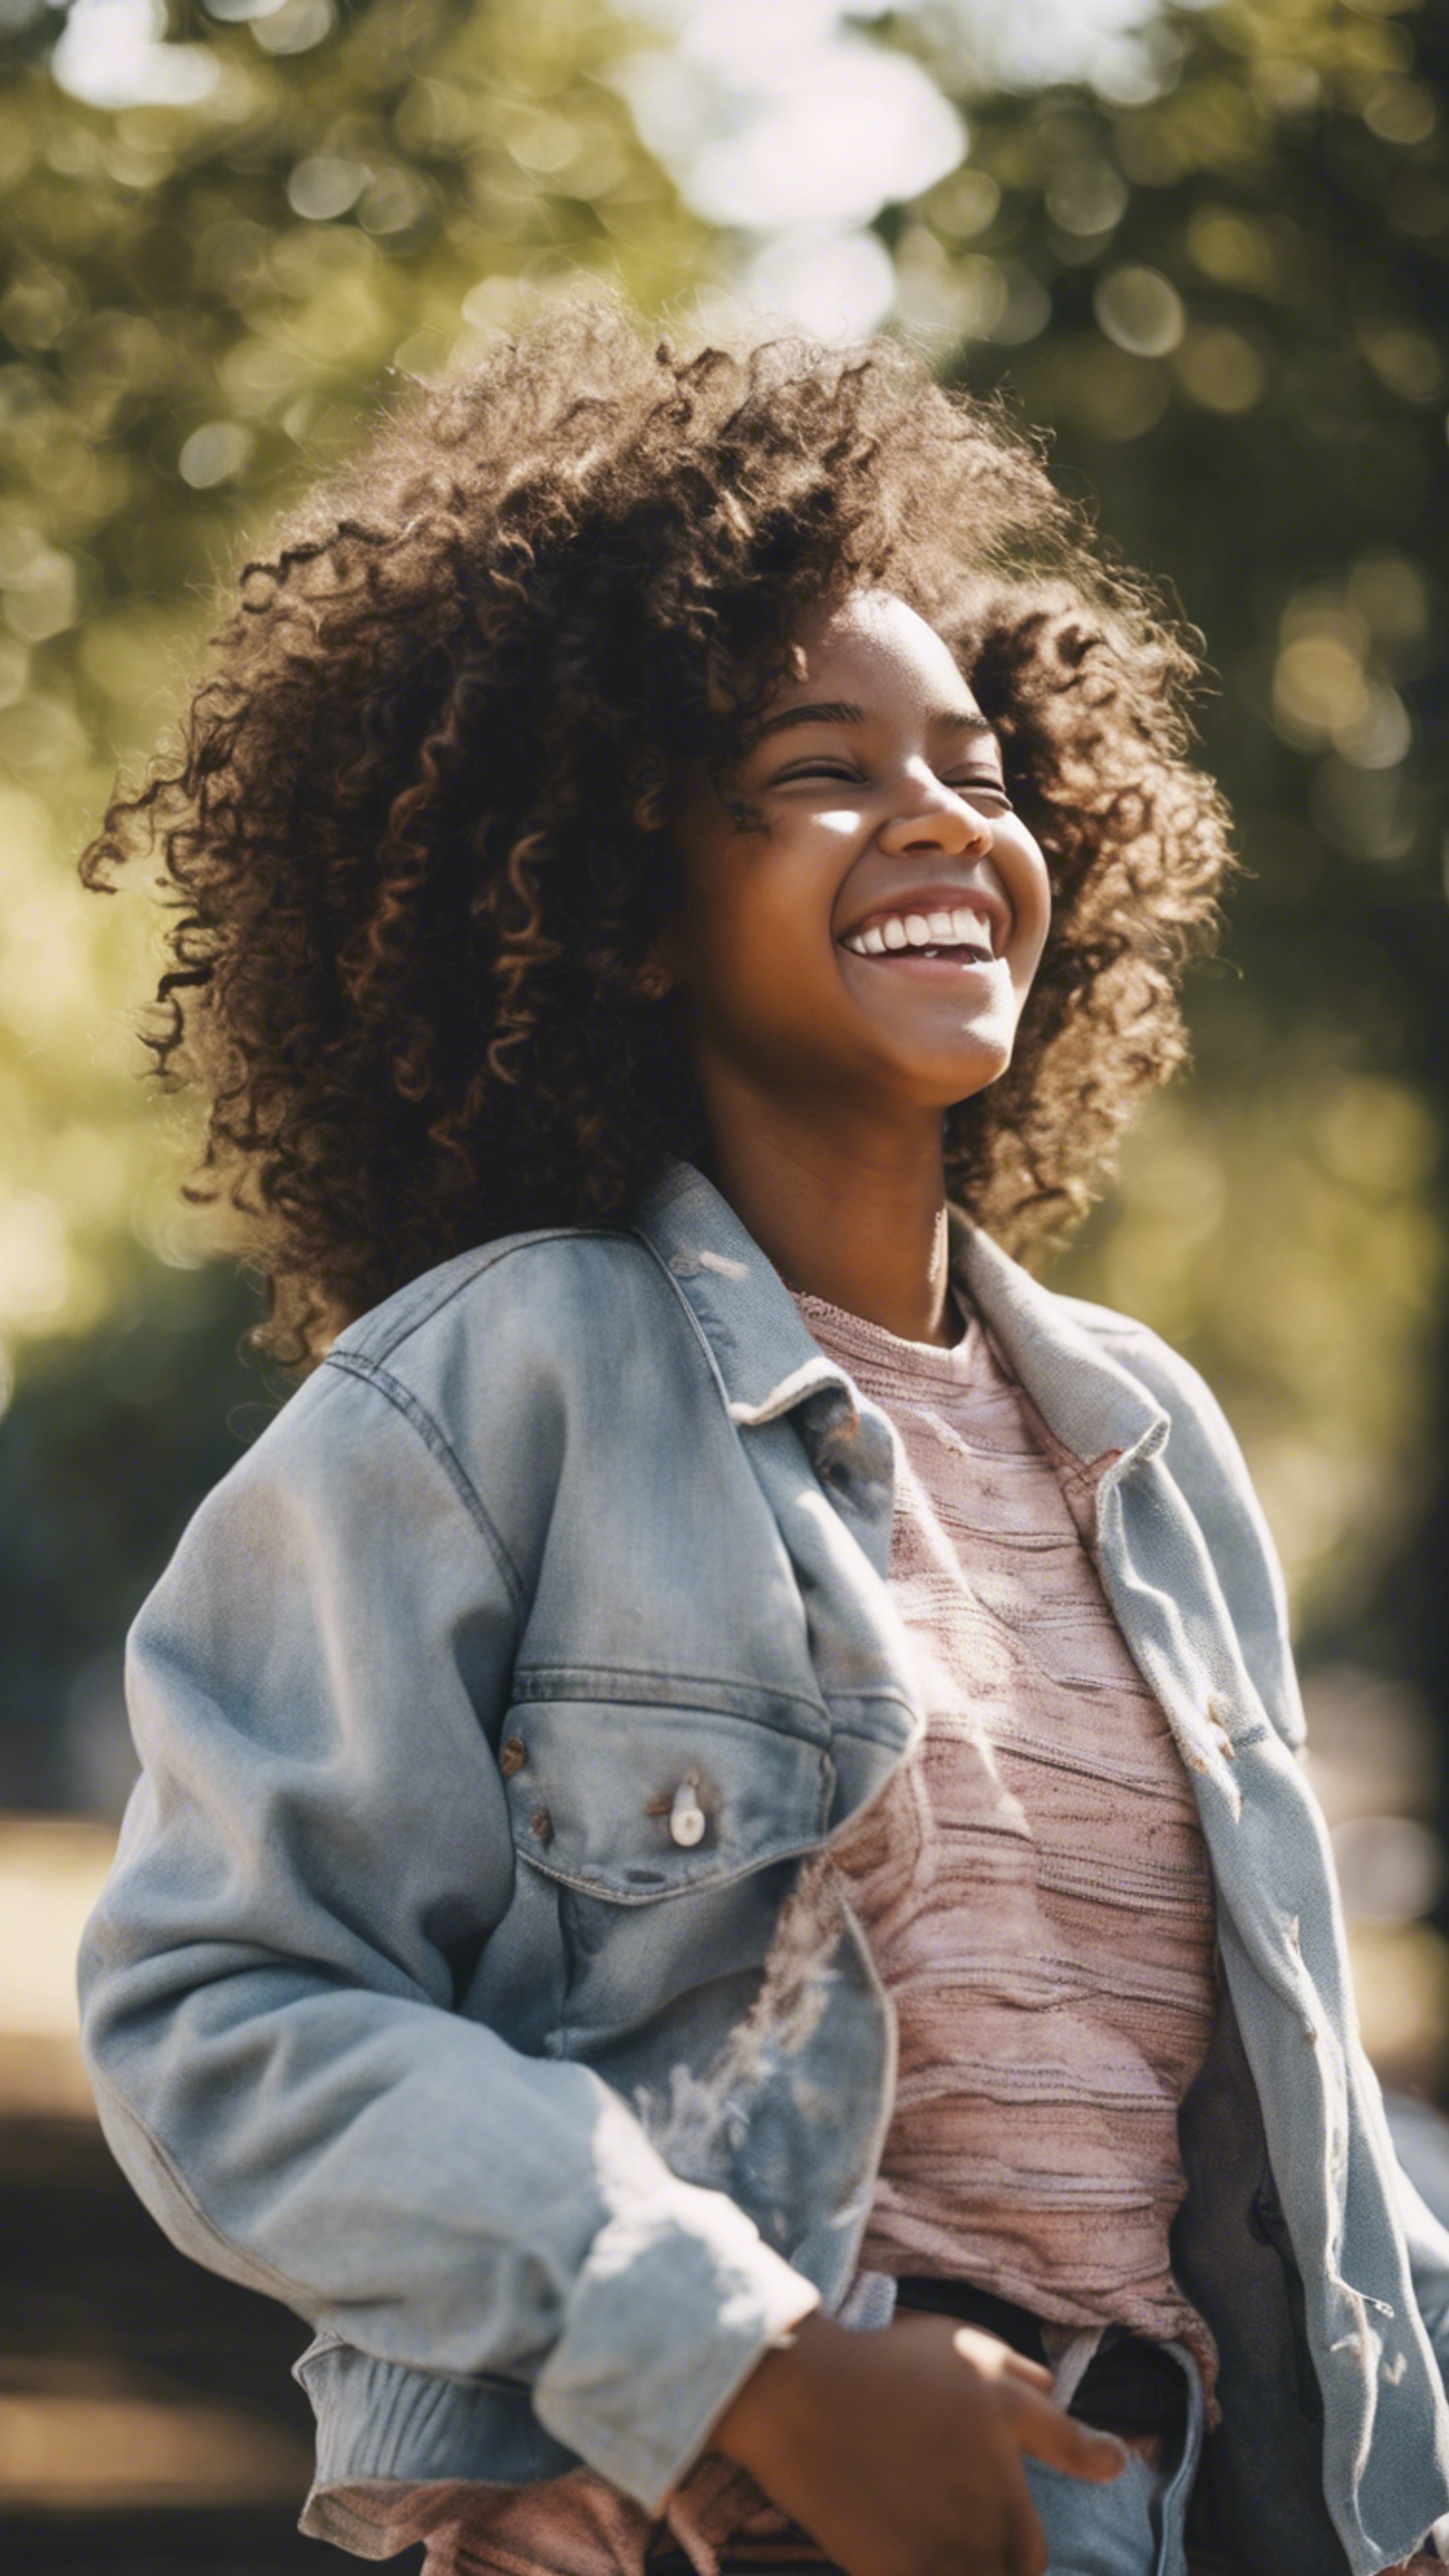 A confident young black girl with big, curly hair laughing while playing in a city park during a sunny afternoon. Tapéta[a9bacc30abb04d56bfae]